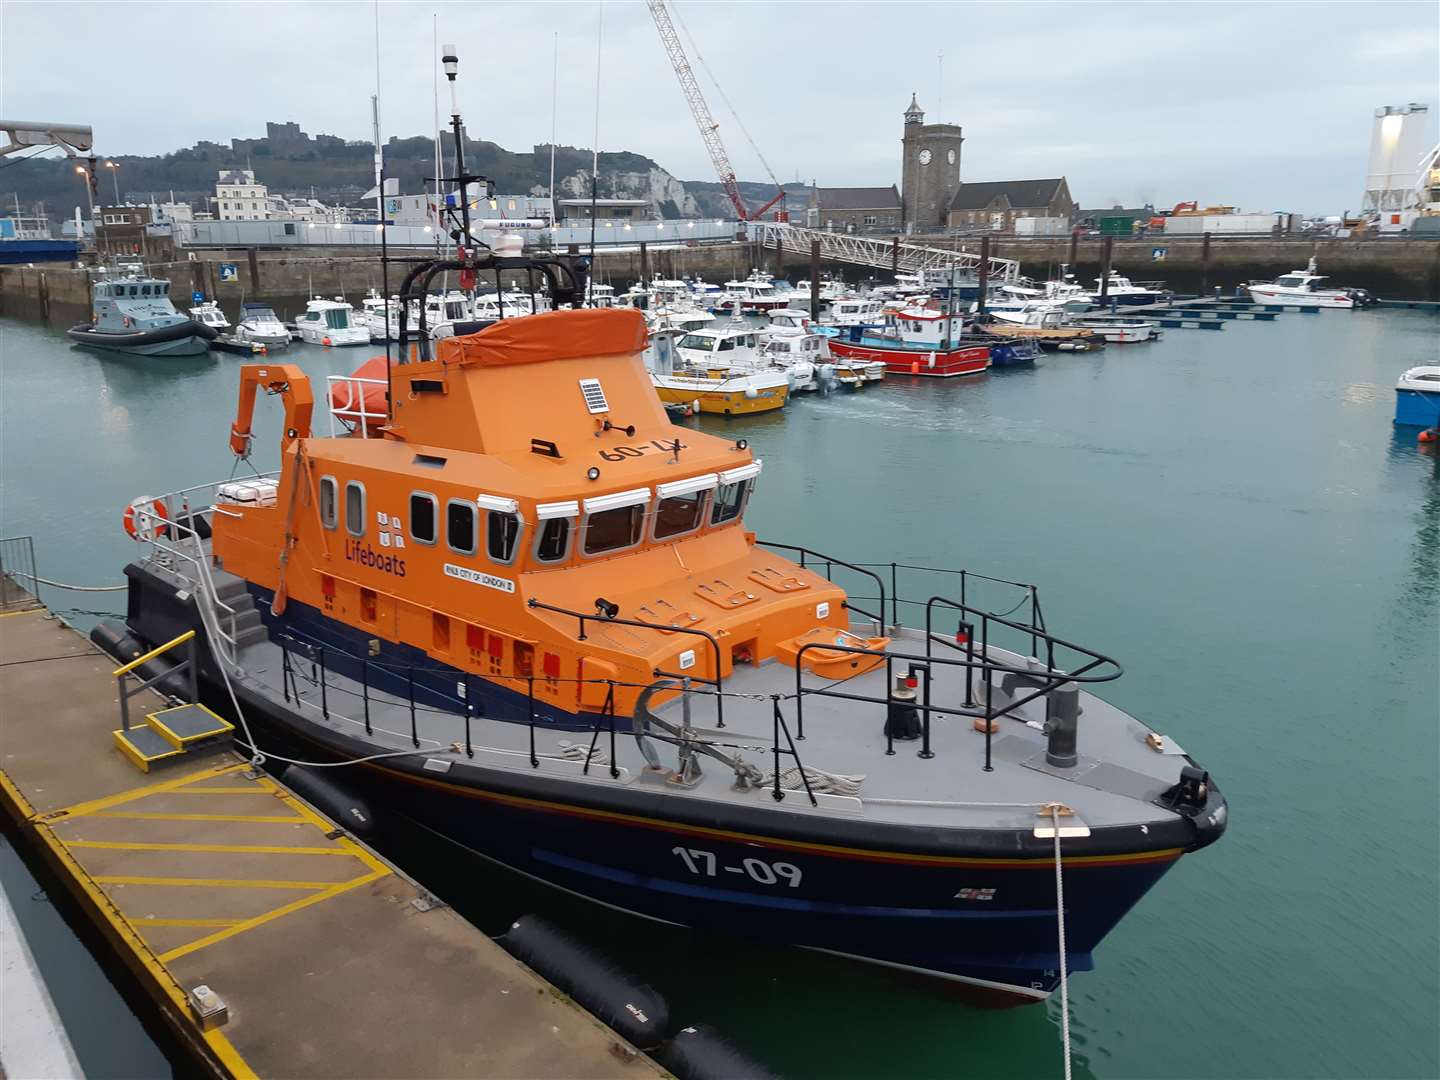 The Dover lifeboat was also called out. Library image